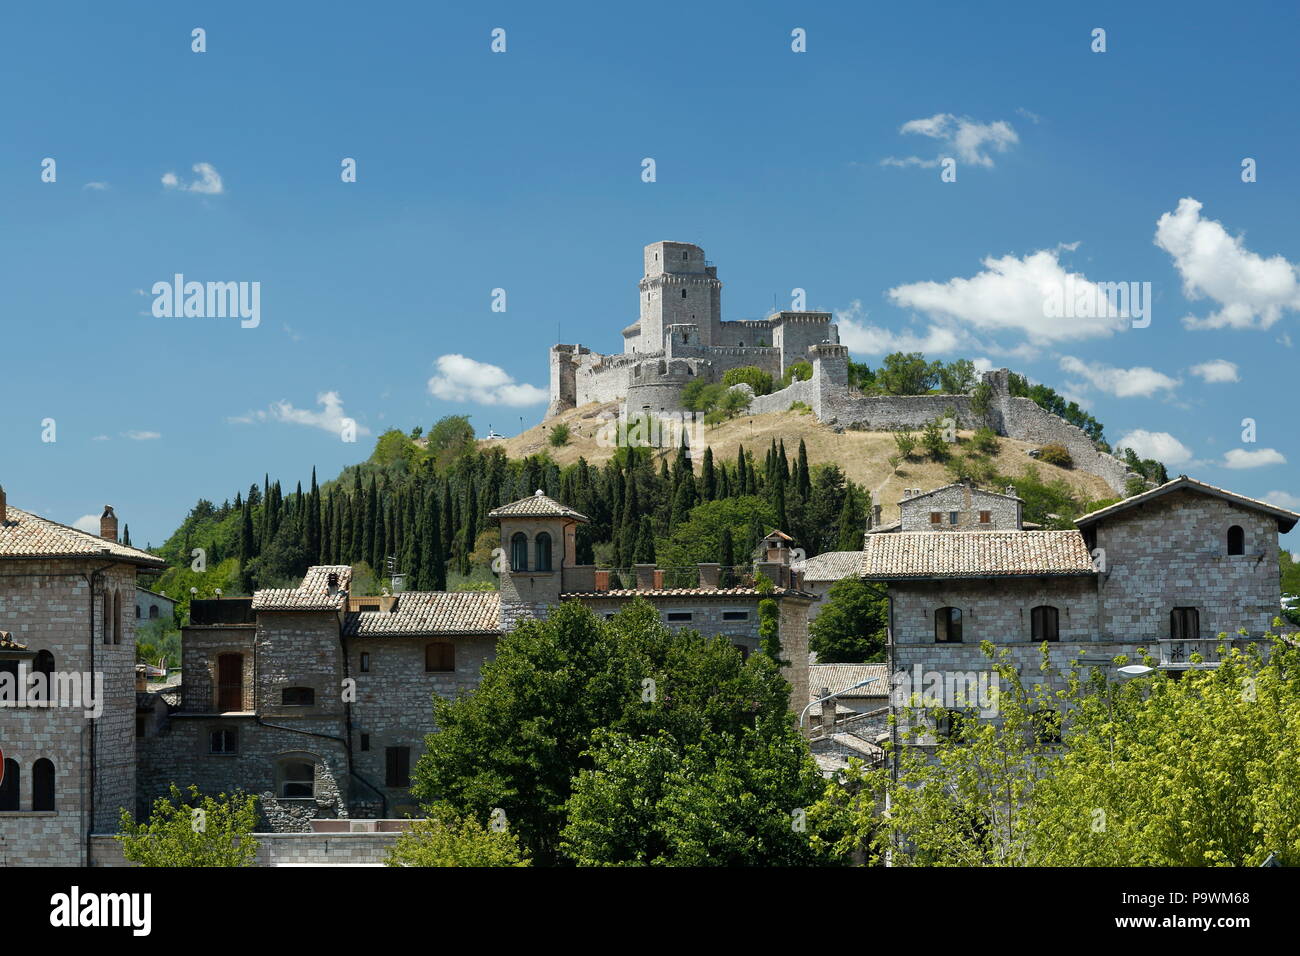 View of Rocca Maggiore fortification, Assisi, Italy, Umbria, Italy Stock Photo